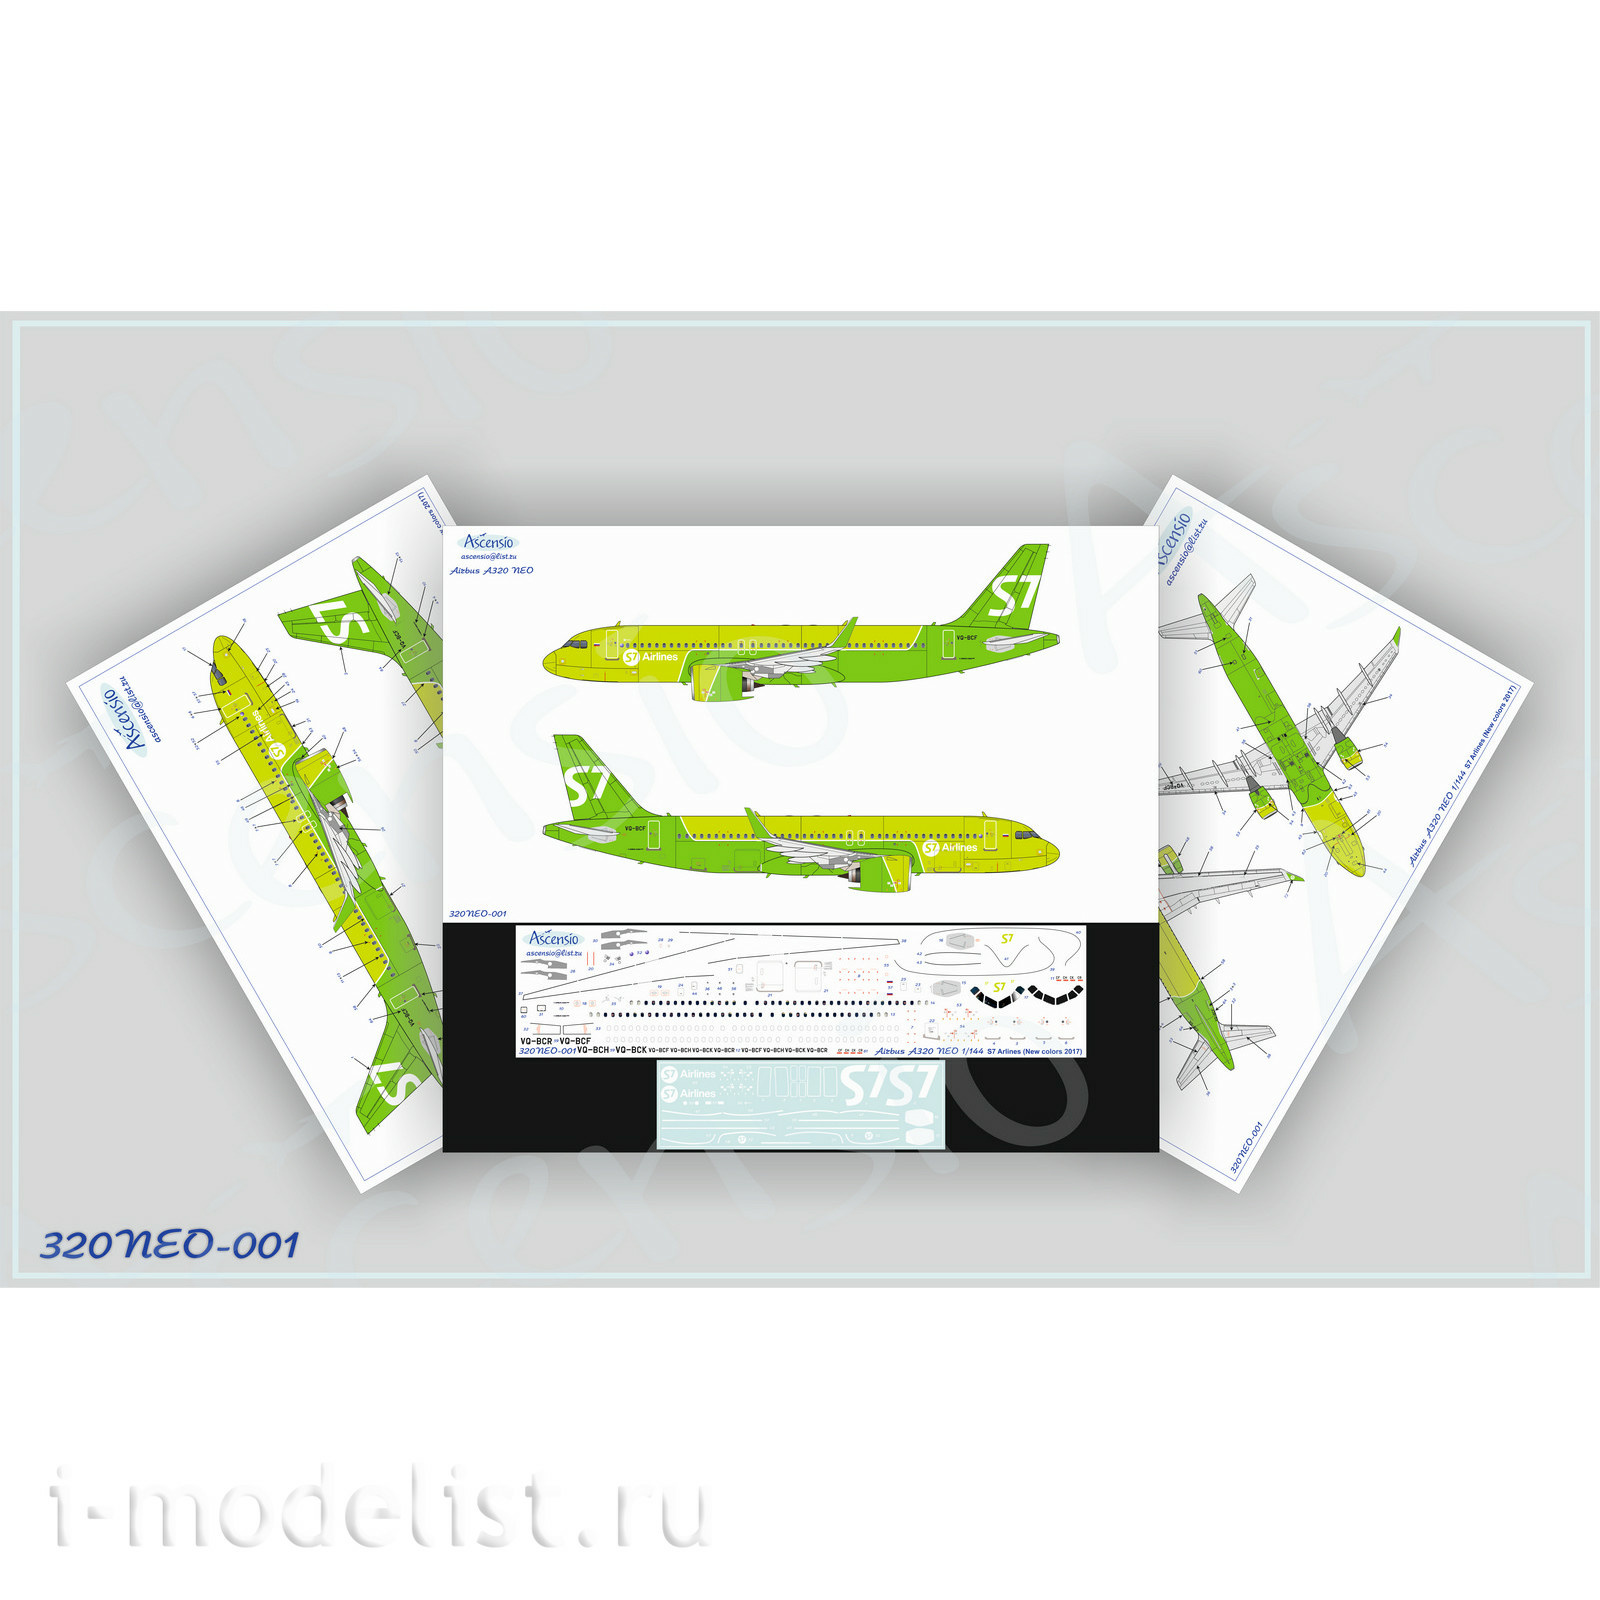 320NEO-001 Ascensio Decal 1/144 Scales for the Airbus A320NEO (S7 Airlines new colors 2017)